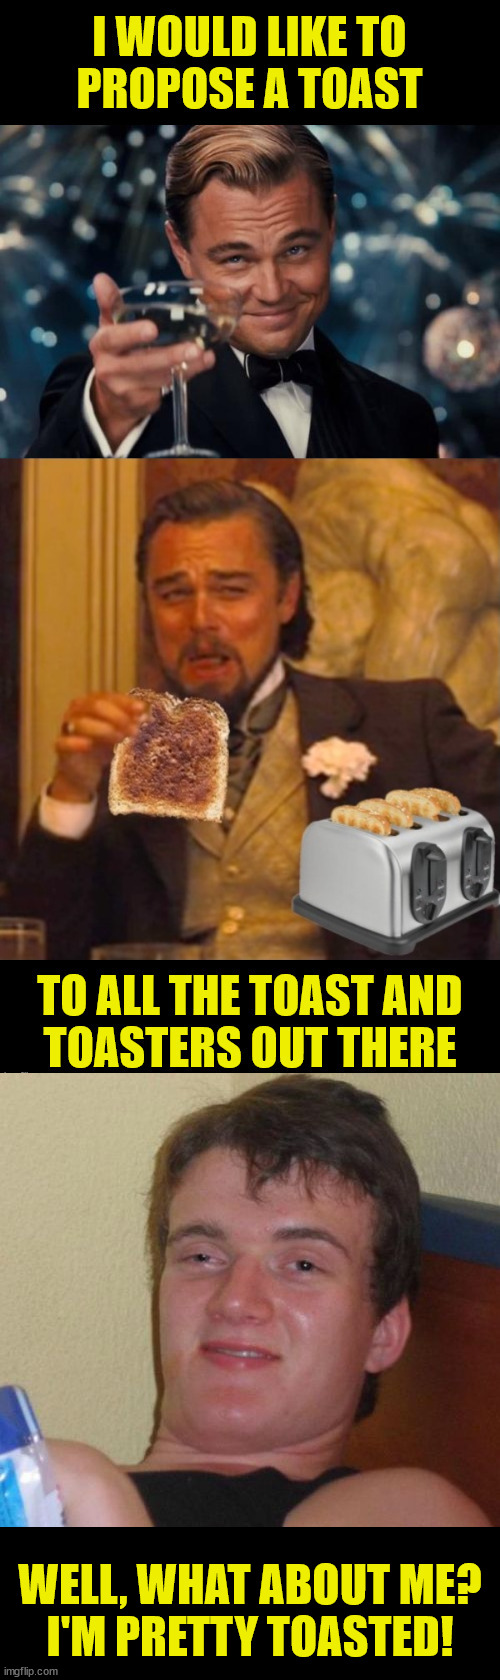 A Toast | WELL, WHAT ABOUT ME?
I'M PRETTY TOASTED! | image tagged in memes,10 guy,laughing leo,leonardo dicaprio toast,i see what you did there,bad pun | made w/ Imgflip meme maker